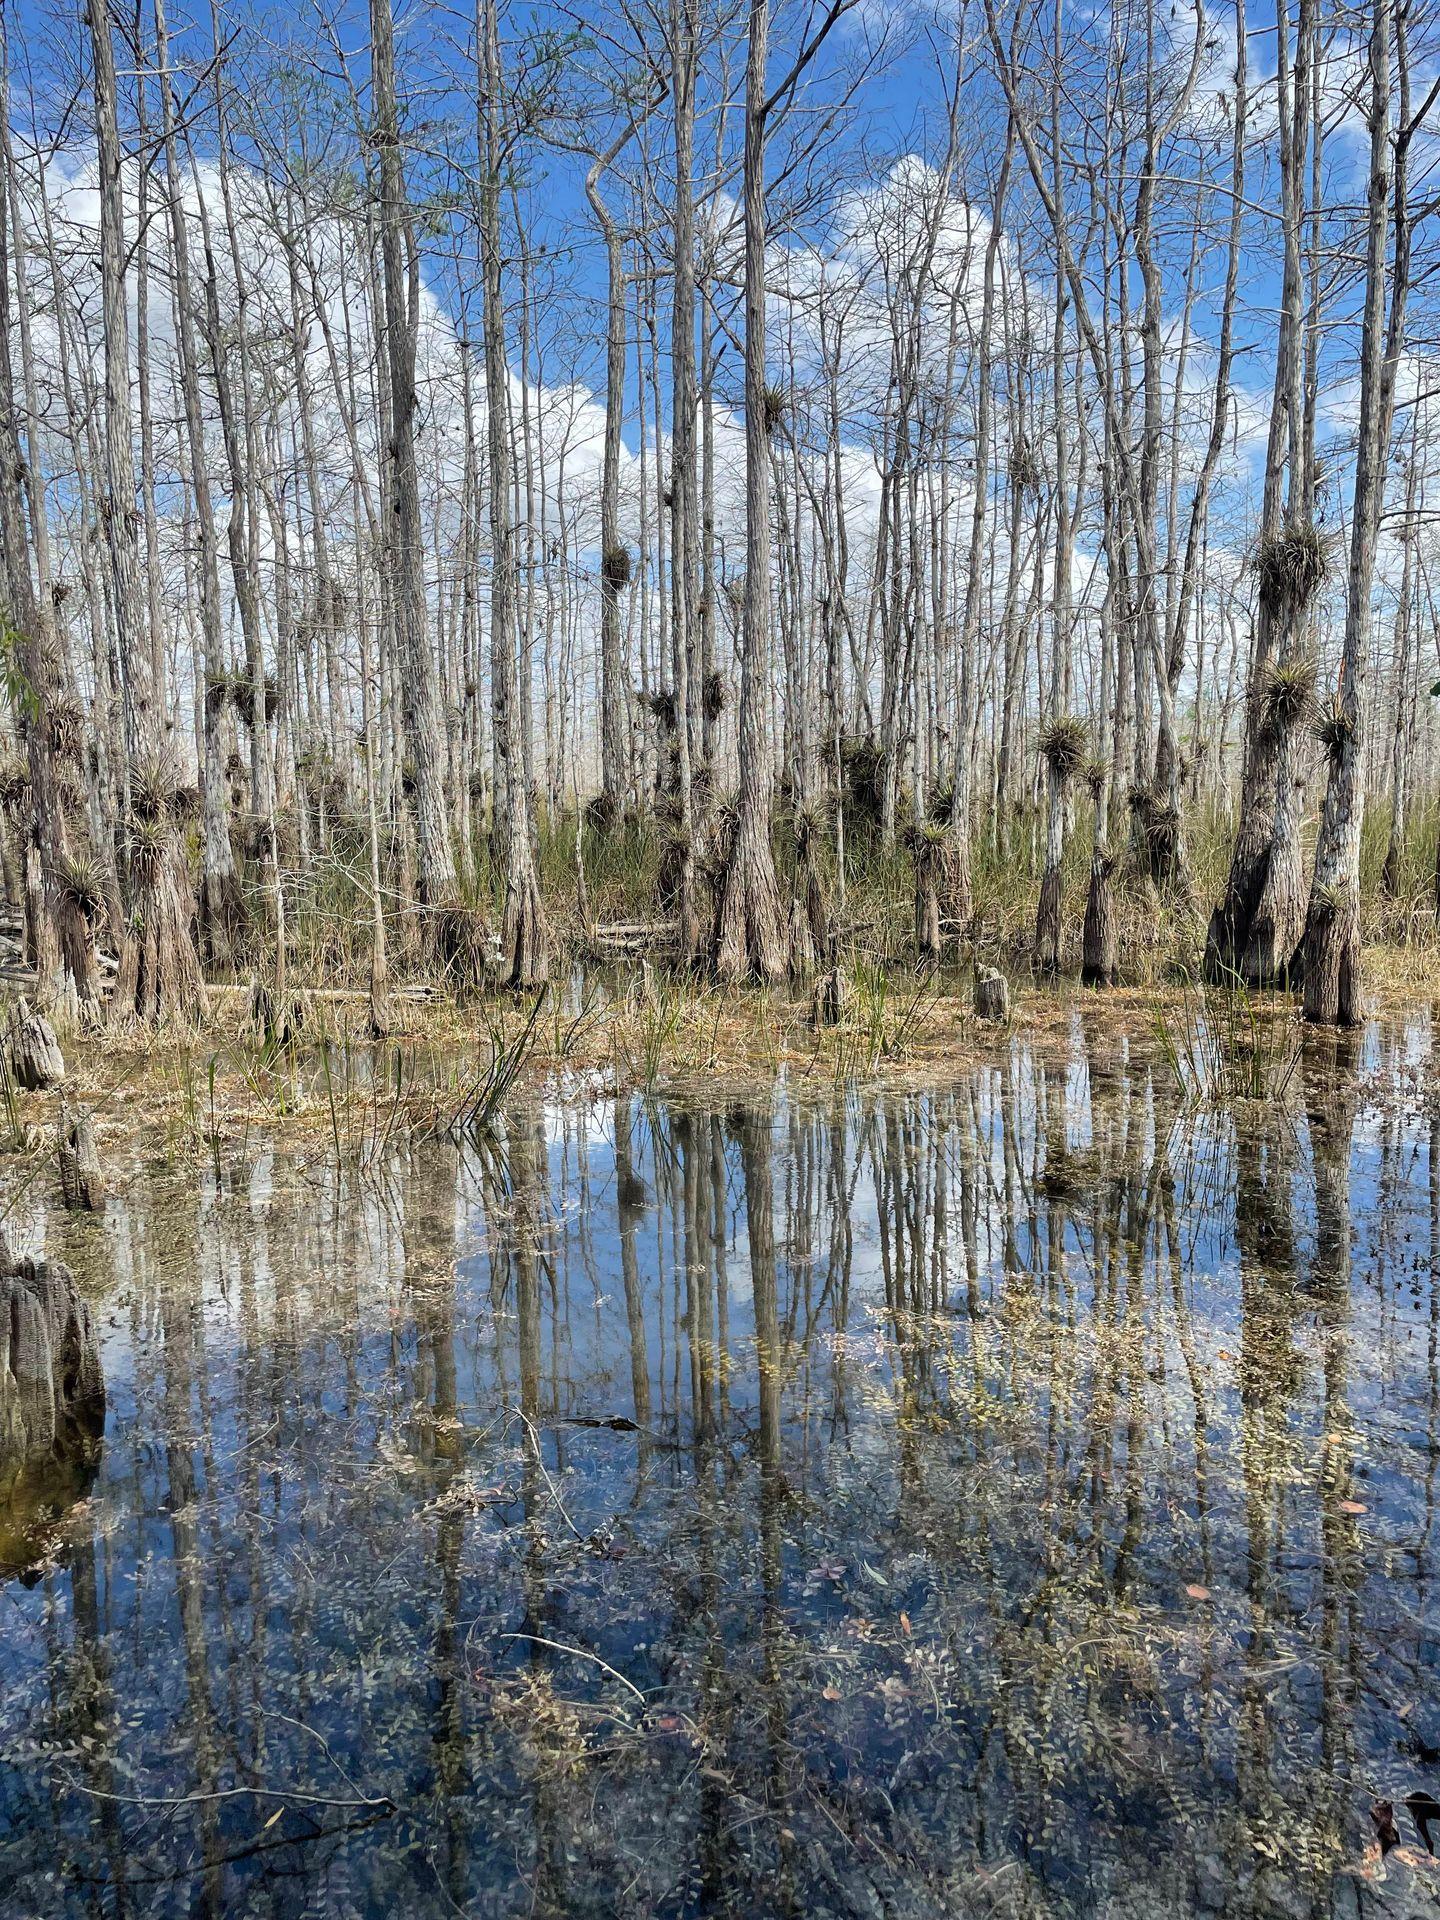 A line of cypress trees with airplants hanging on the trees. There is water in the foreground that holds the reflection of the trees.